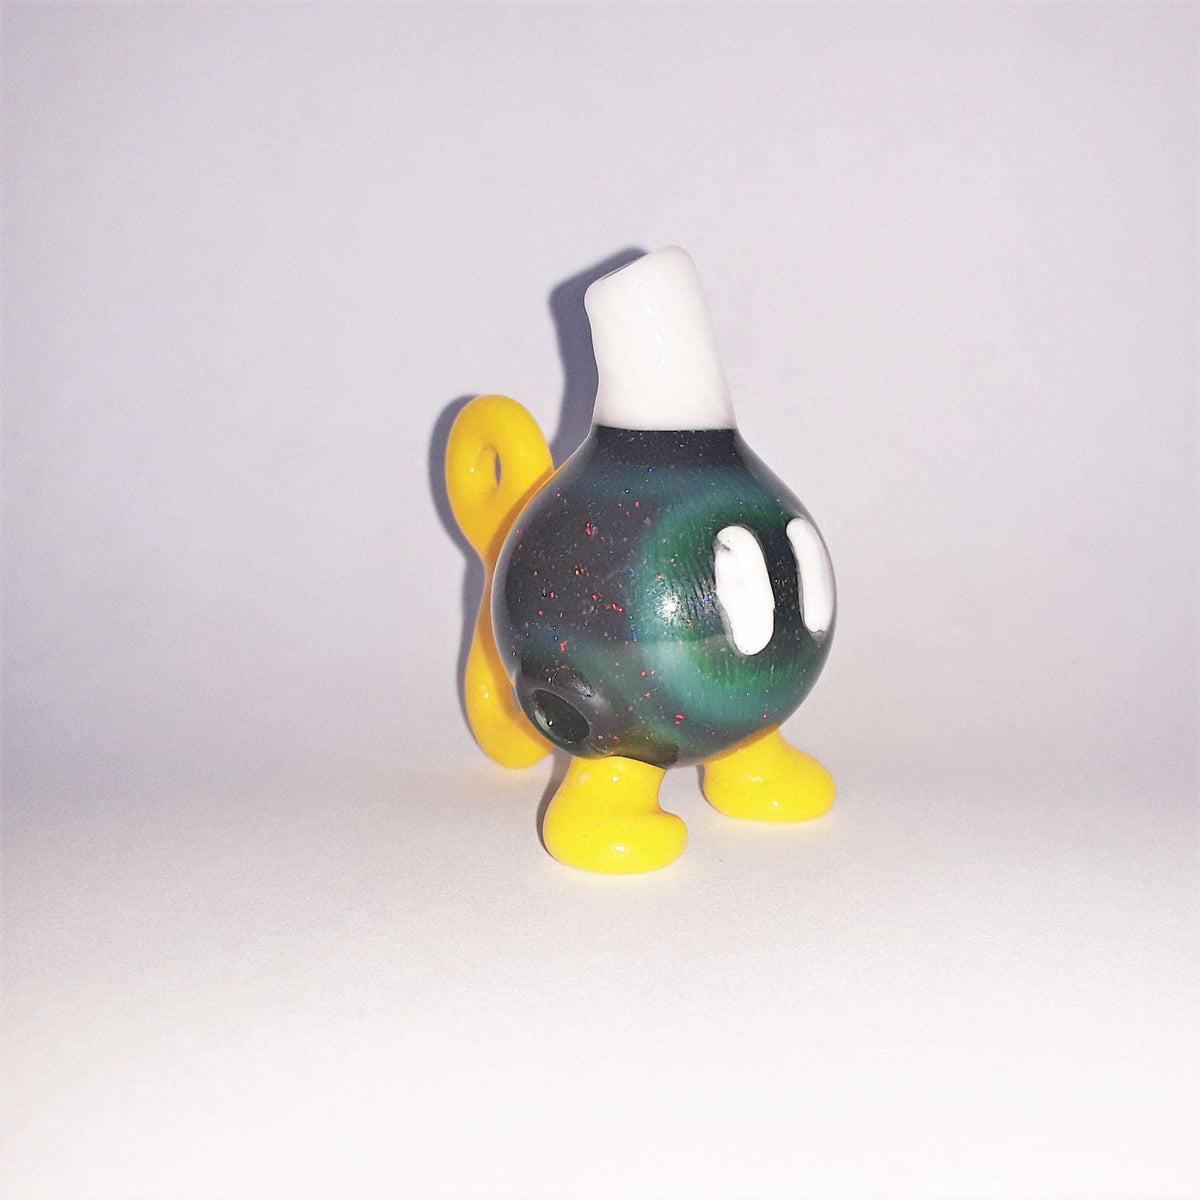 Bob-Omb Directional Flow Carb Cap (Signed)